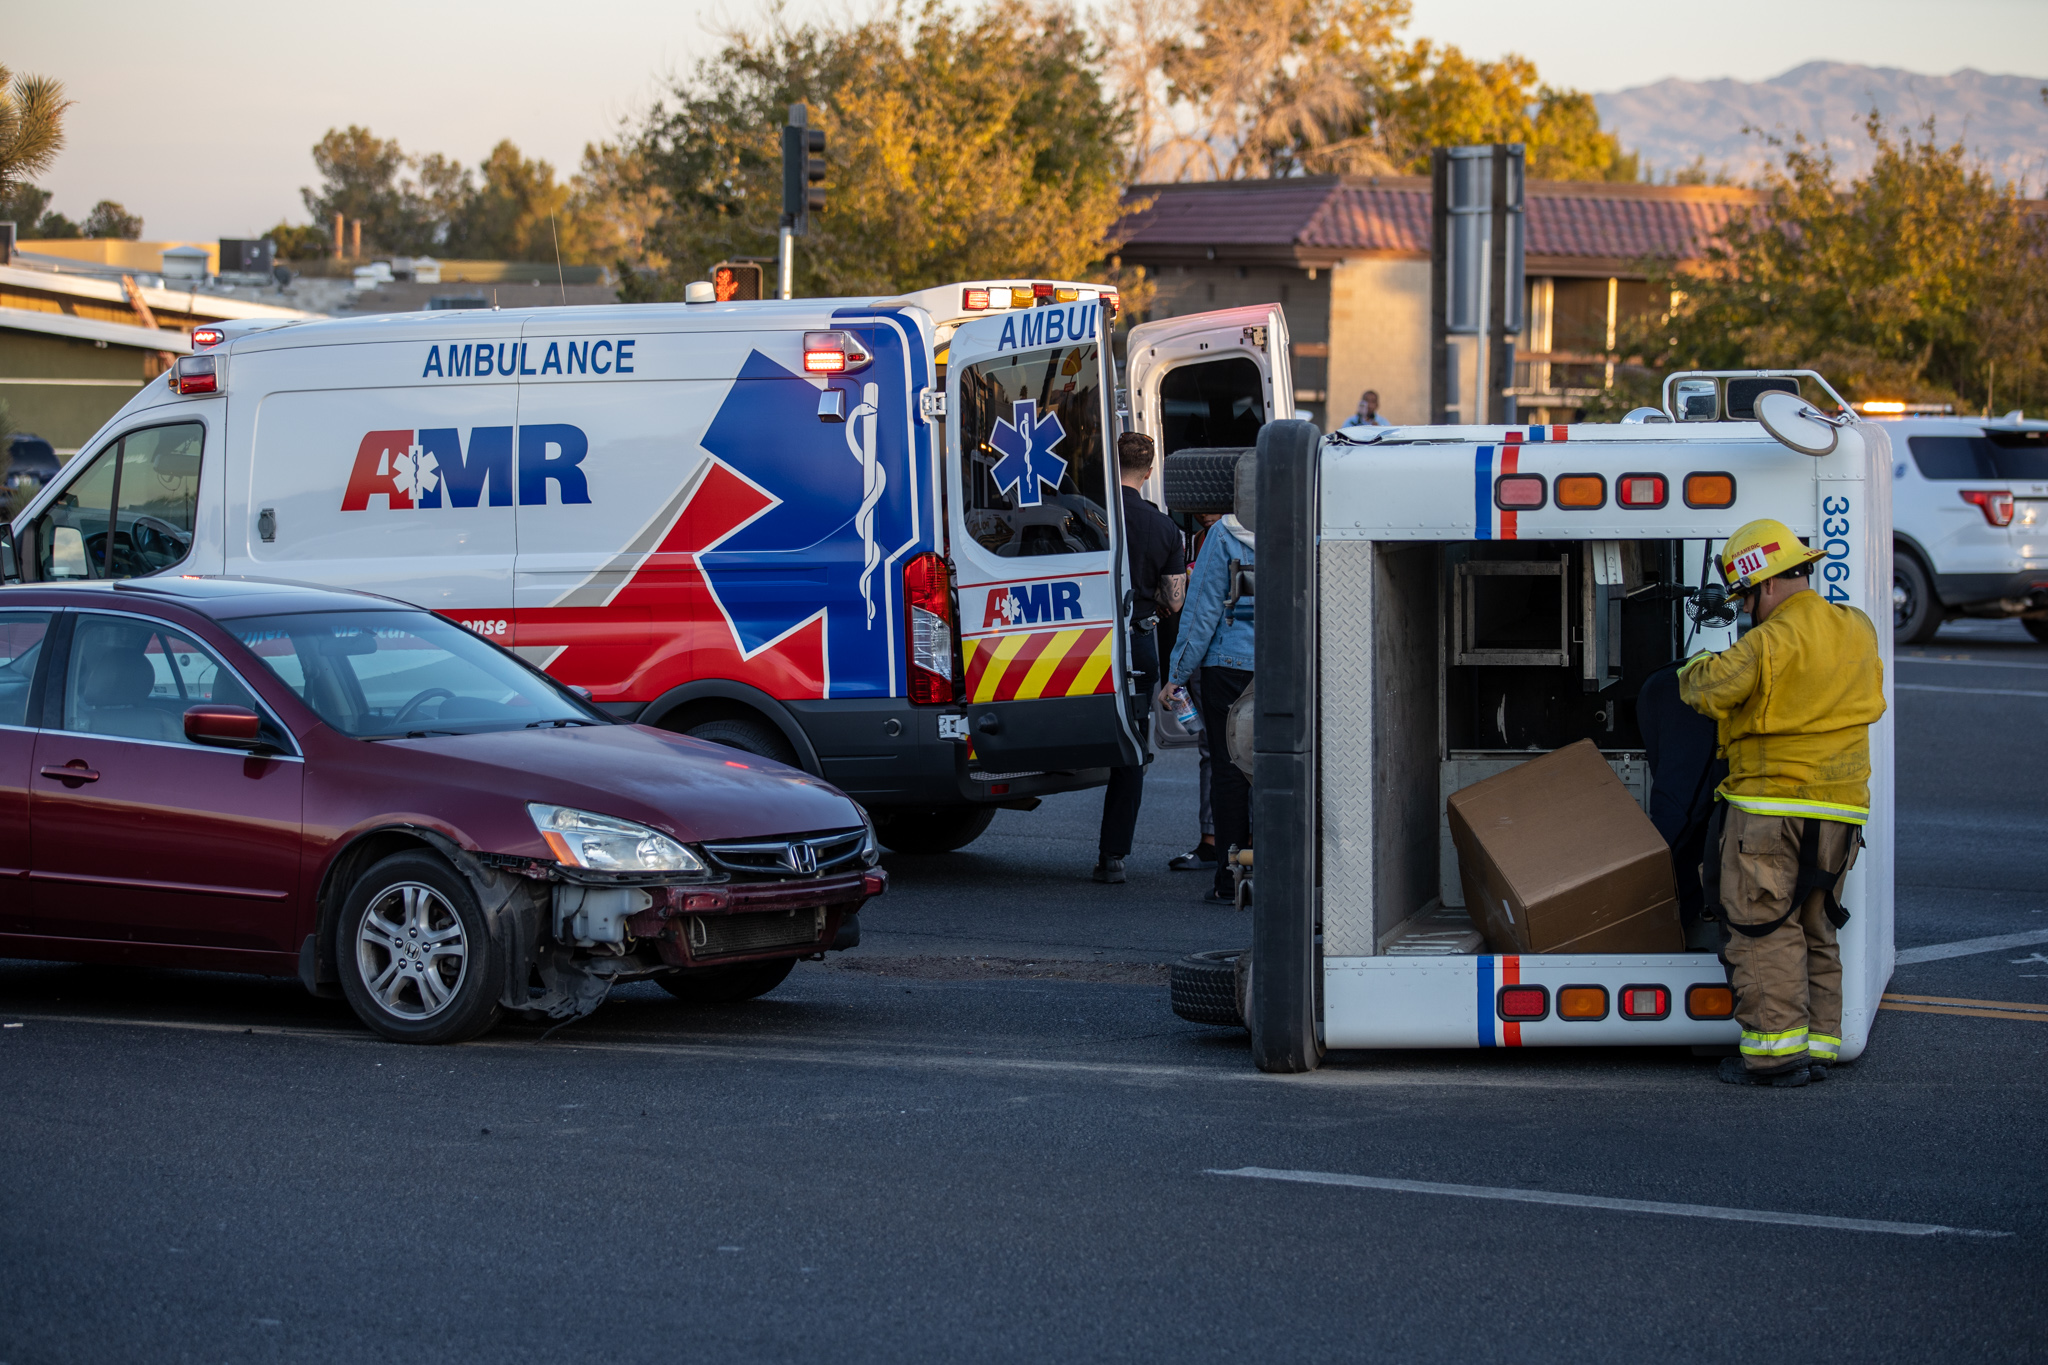 No serious injuries after crash involving USPS mail truck in